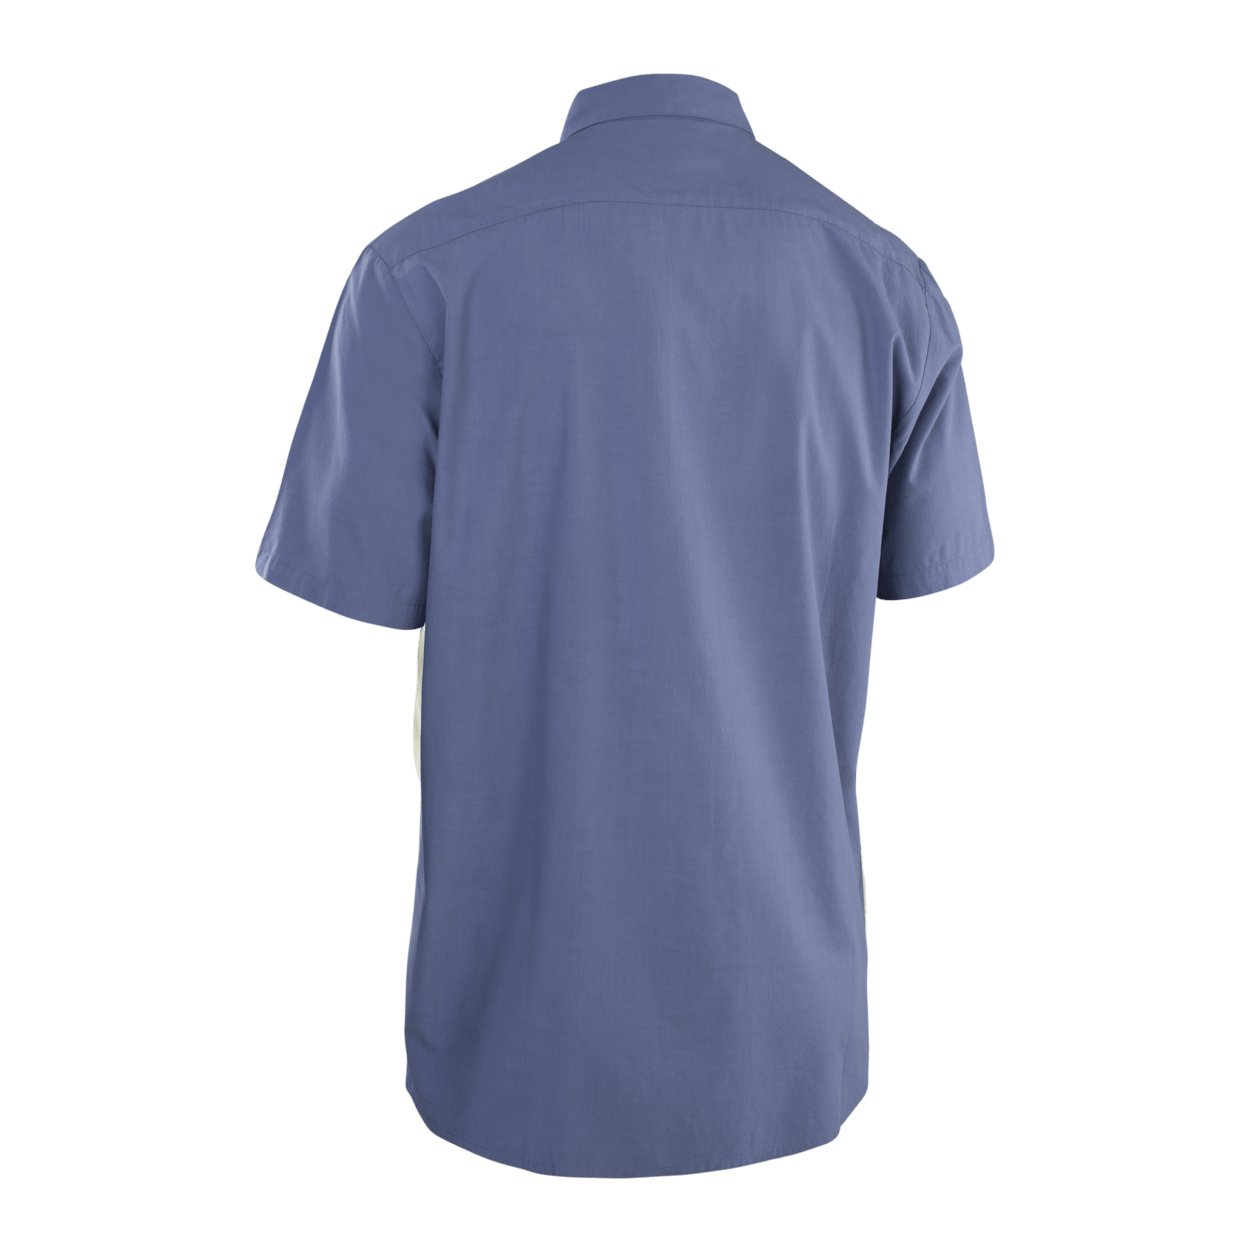 ION Shirt Stoked 2.0 SS men 2023 - Worthing Watersports - dummy - Apparel - ION Bike